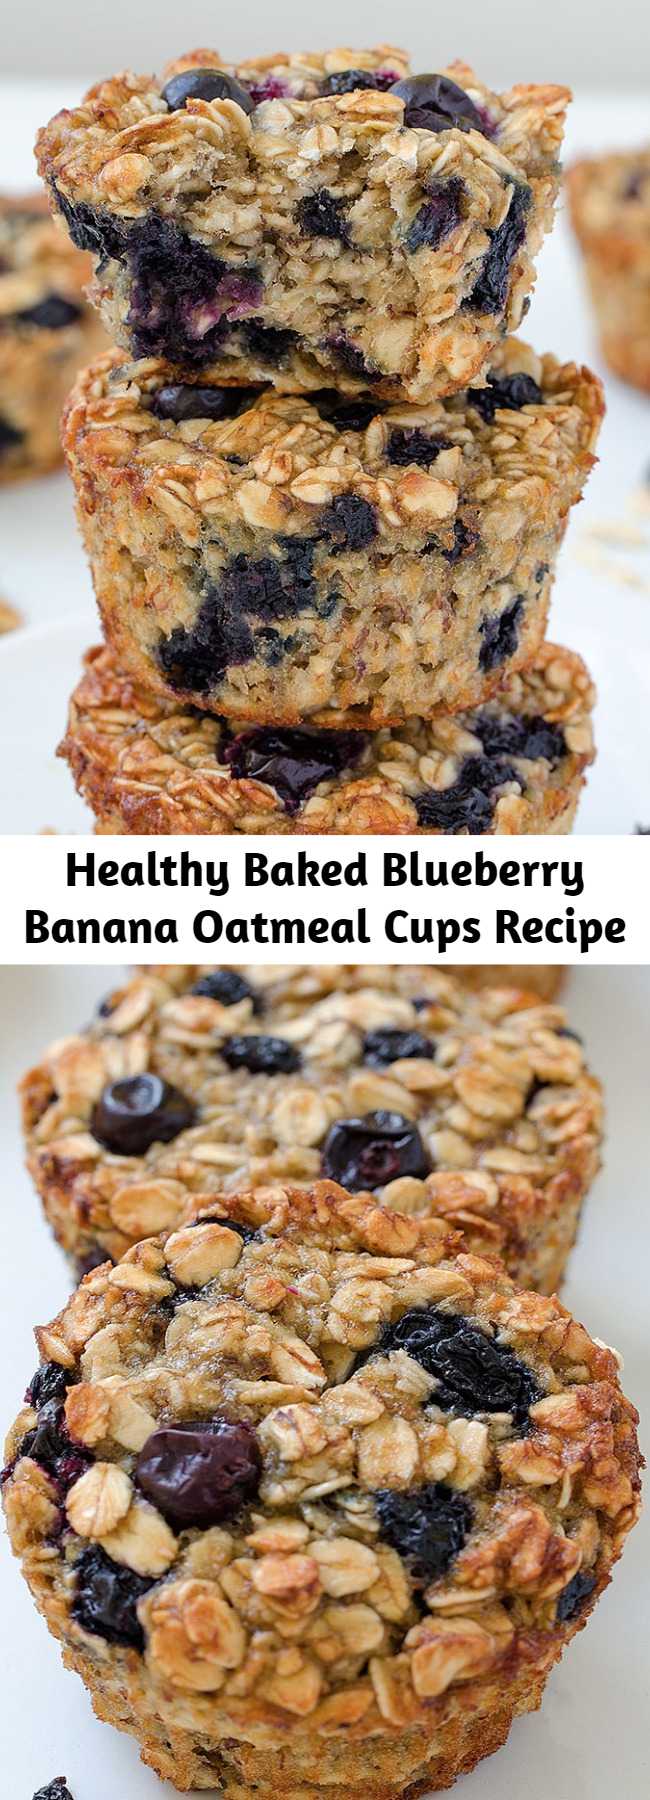 Healthy Baked Blueberry Banana Oatmeal Cups Recipe - Baked Blueberry Banana Oatmeal Cups - perfect and healthy way to start your day! Delicious, moist and not too sweet! Very easy to make, fast to eat and good choice for every occasion!